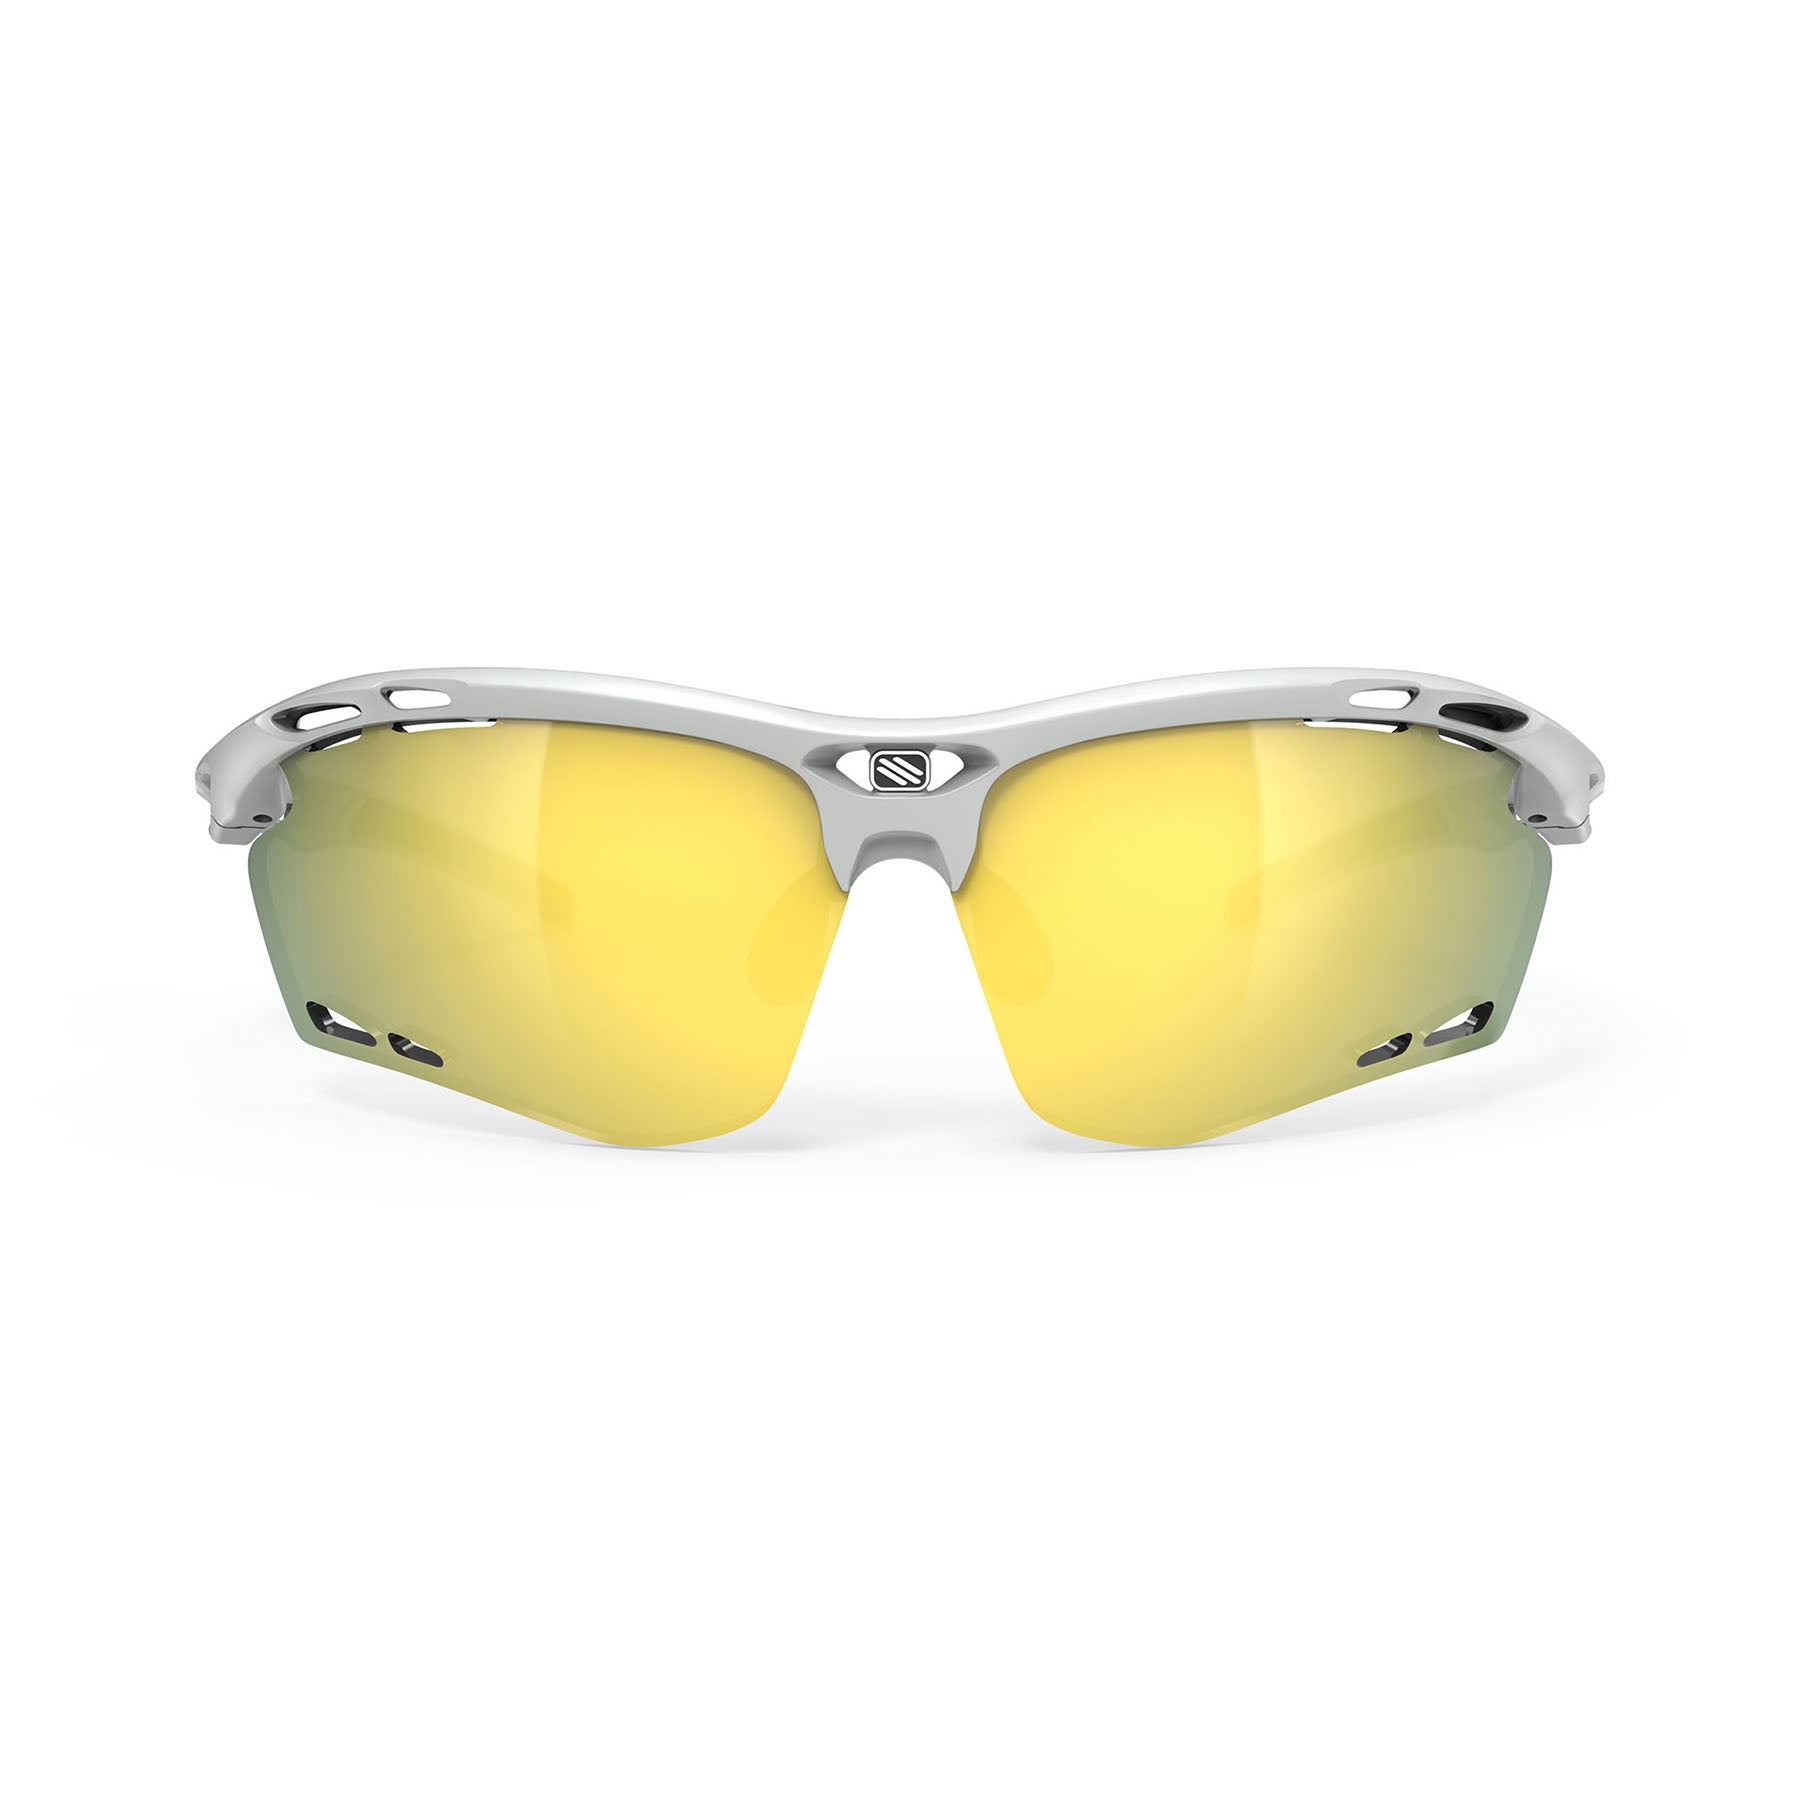 Rudy Project Propulse running and cycling sport prescription sunglasses#color_propulse-light-grey-matte-frame-with-multilaser-yellow-lenses